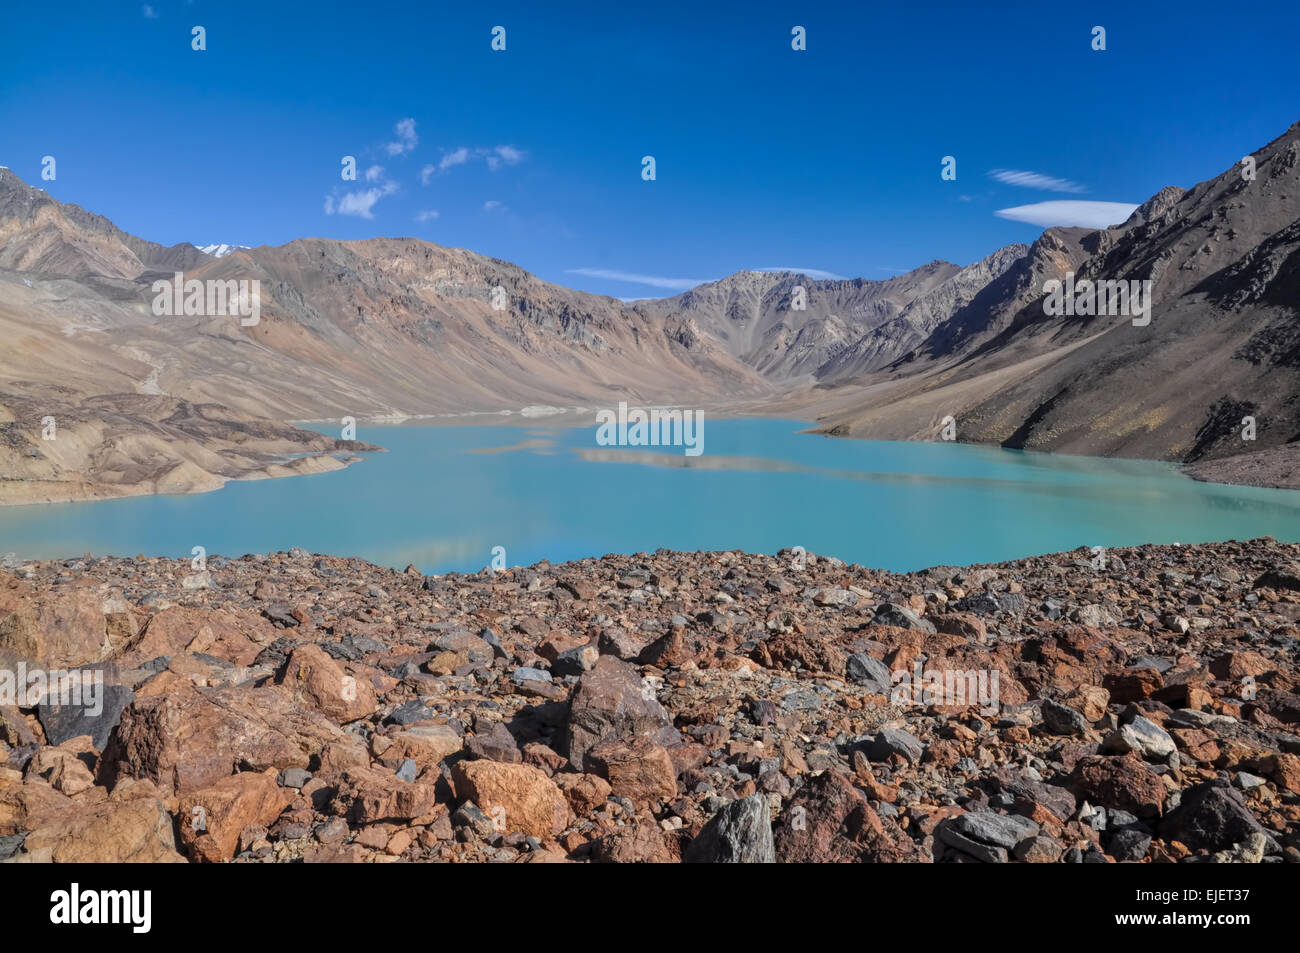 Scenic lake in rocky valley in Pamir mountains in Tajikistan Stock Photo